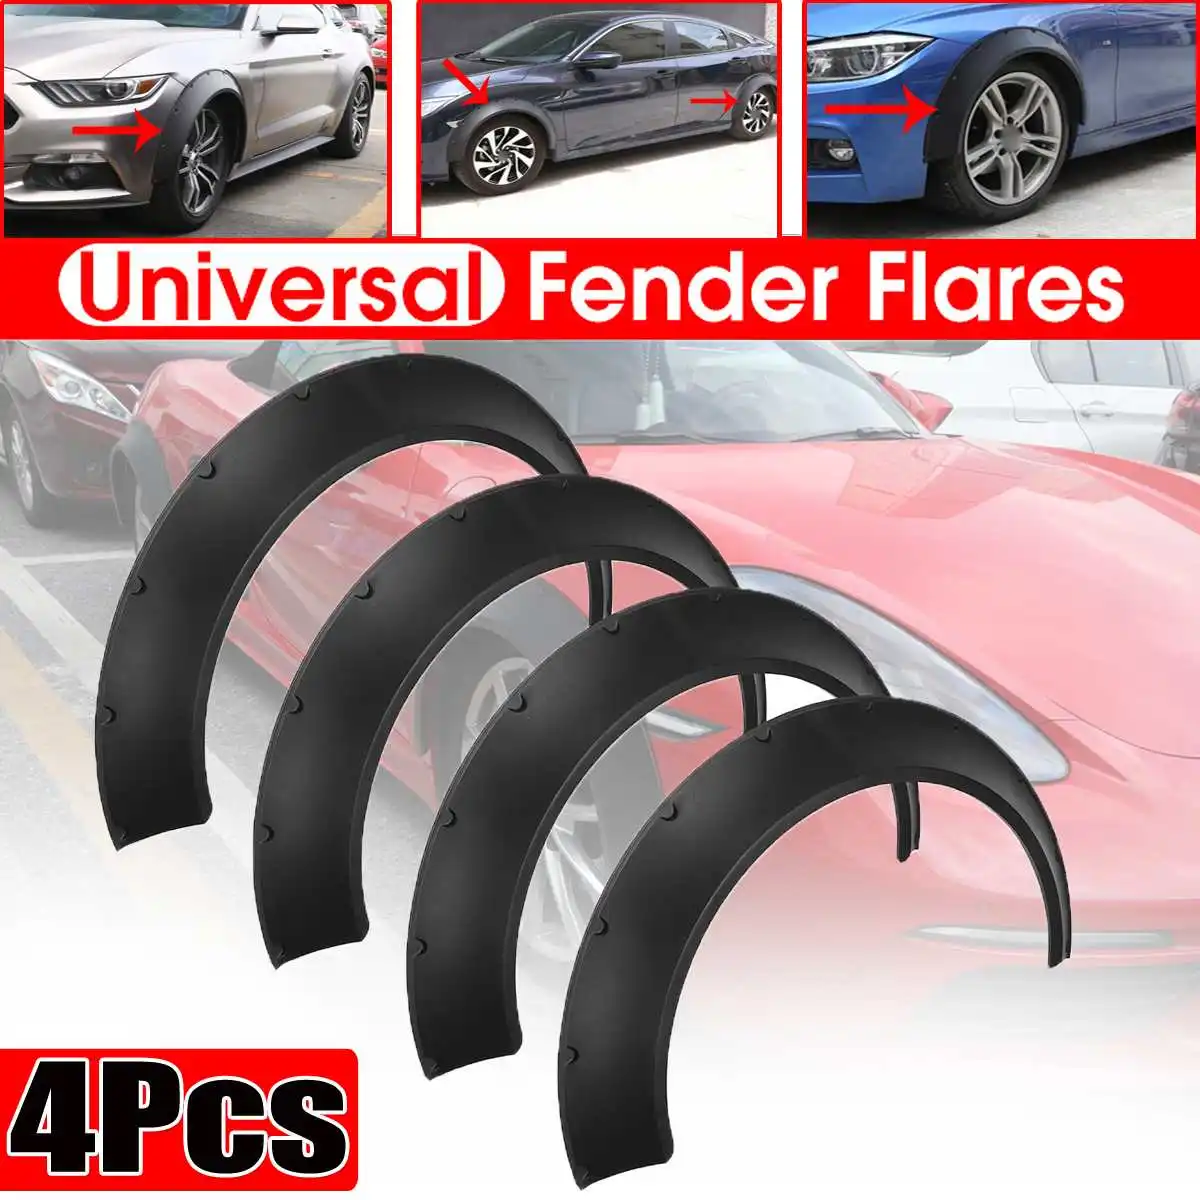 4x Flexible Universal Car Wide For Fender Flares Wheel Arches Extension For BMW F32 F33 F36 E90 E92 E93 For BENZ W205 W204 W203